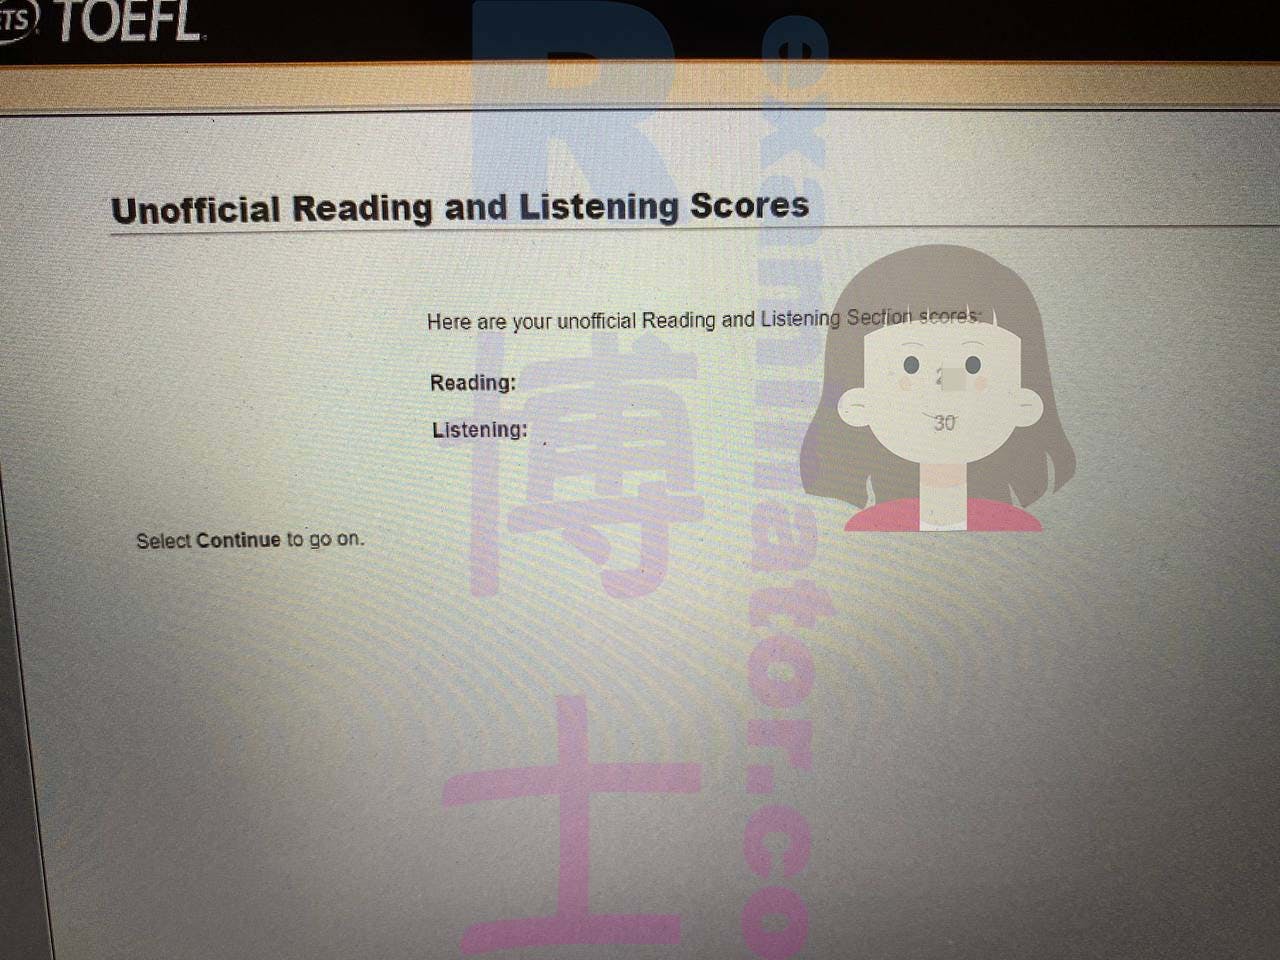 🎉 🇹🇼Taiwanese Customer Achieves Near-Perfect TOEFL Scores with our Help - See the Chatlog for the Attention to Detail We Provide!